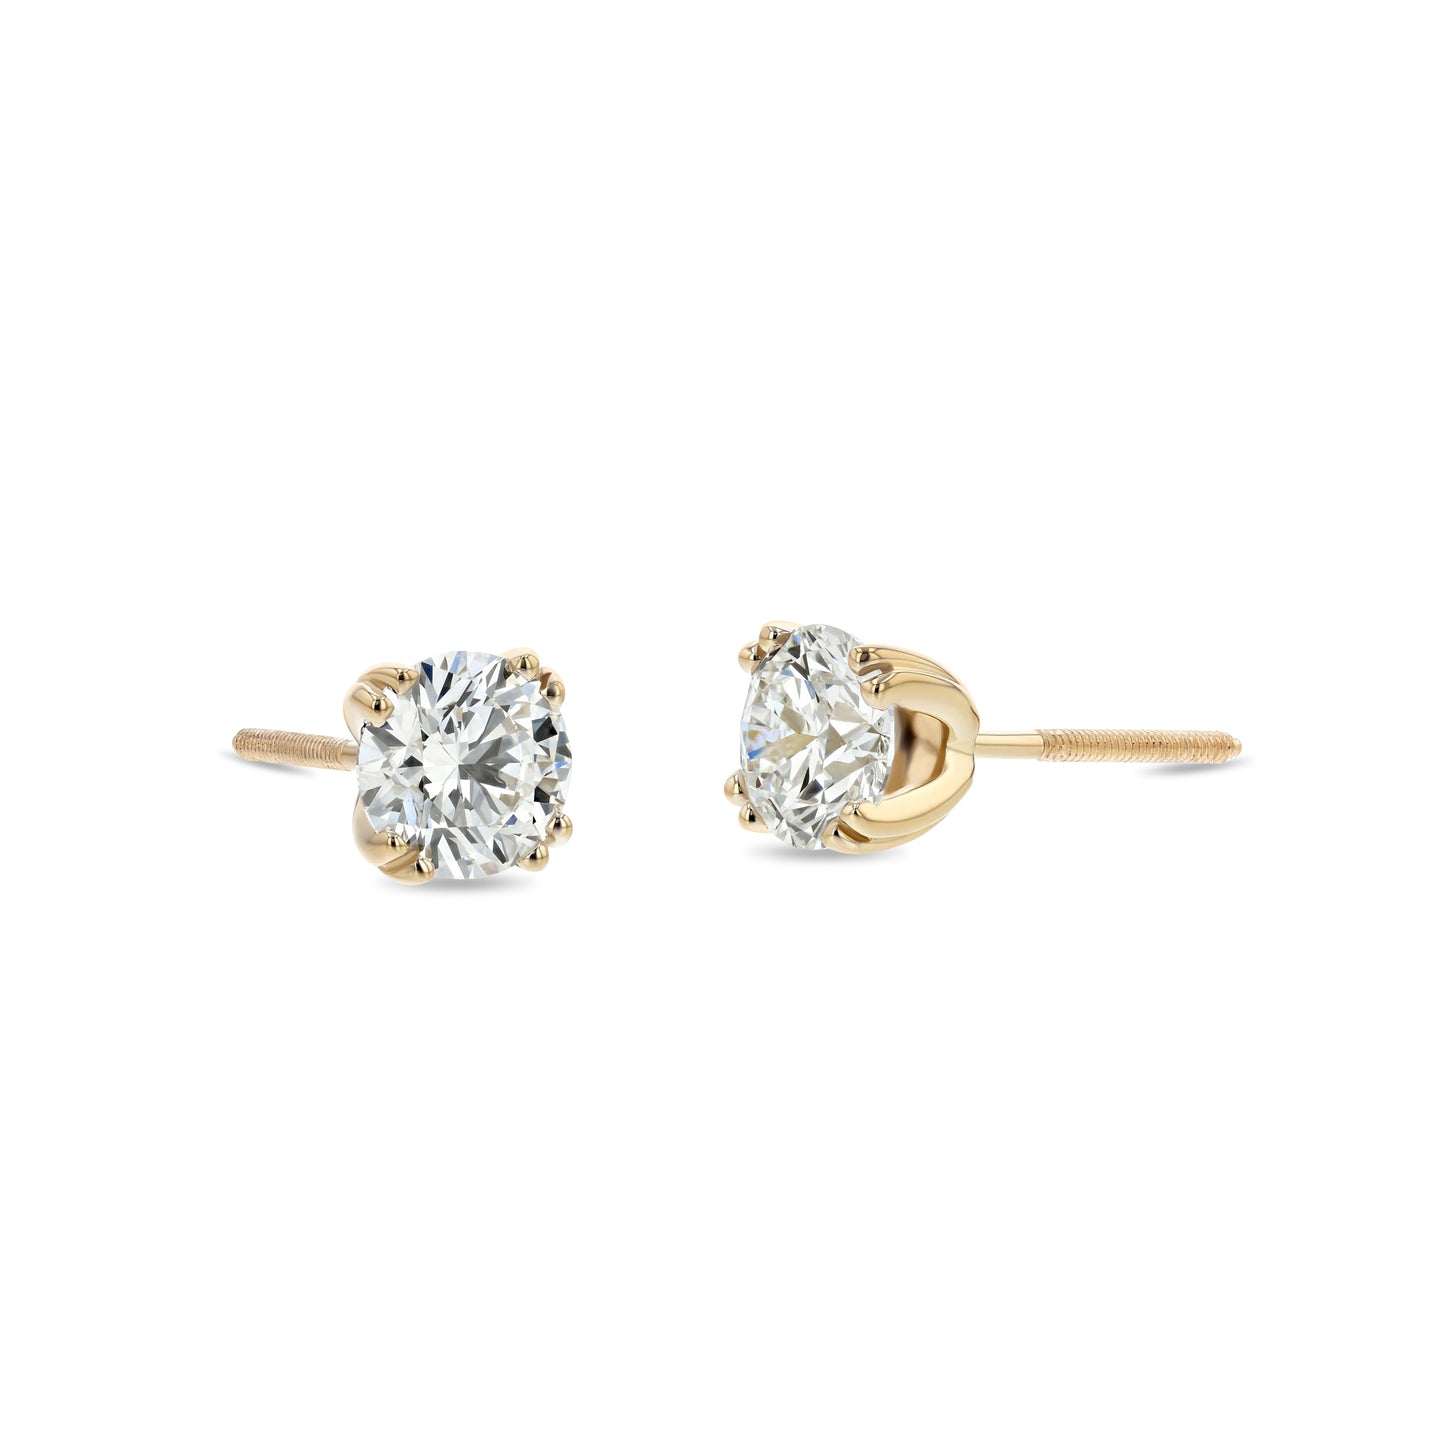 18k Yellow Gold Double Prong Round Diamond Stud Earrings 1ctw (5.2mm Ea), H Color, Si3-i1 Clarity